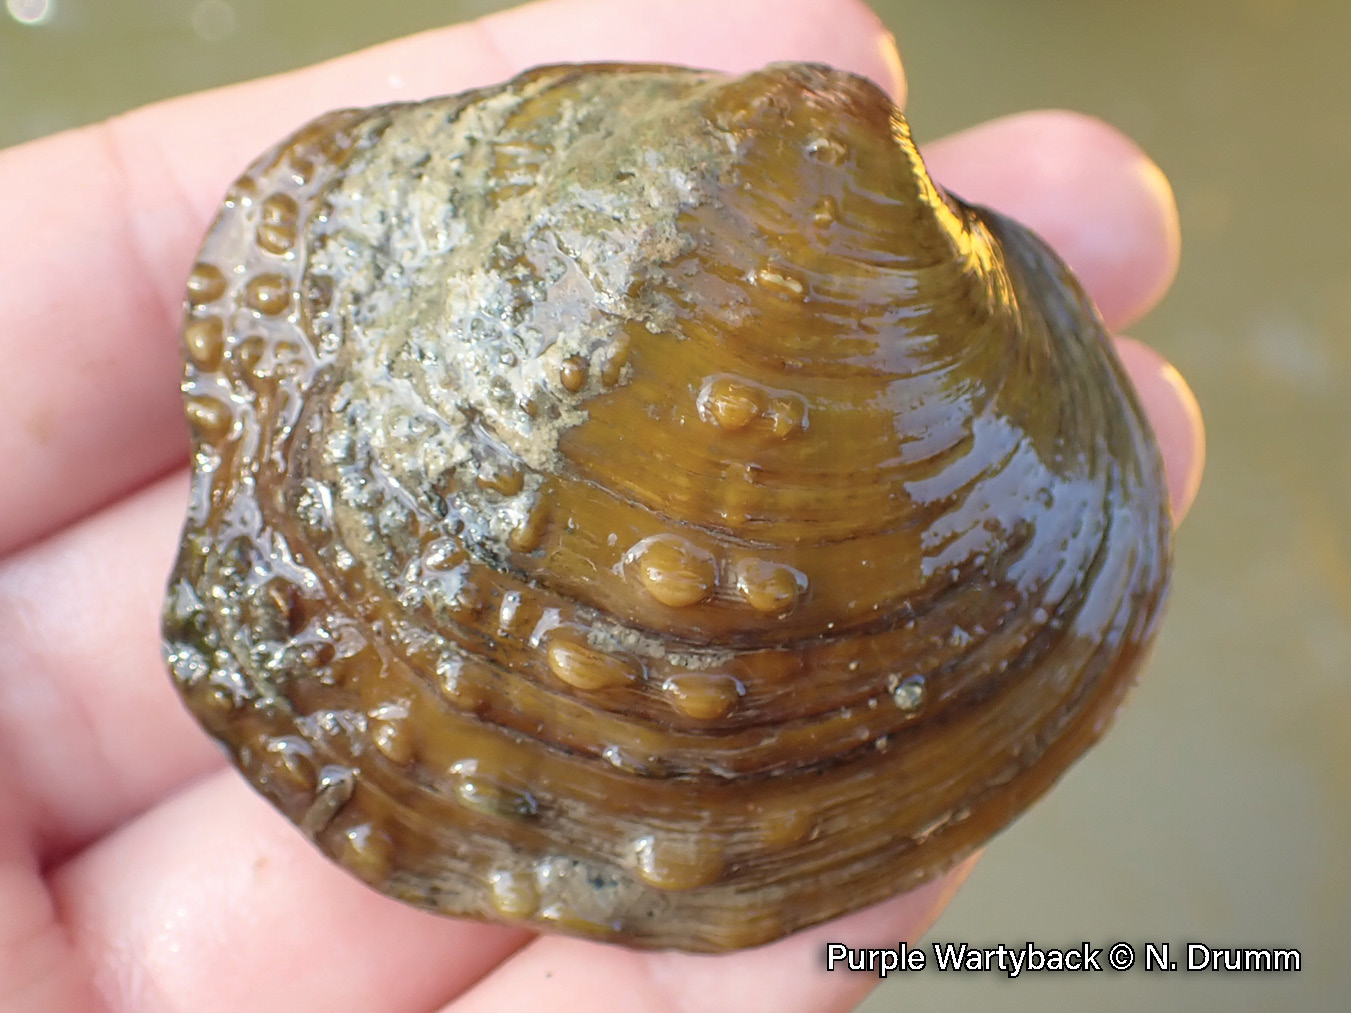 Picture of a young Purple Wartyback mussel in a hand, a yellowish-brown, medium-sized mussel that is covered in bumps